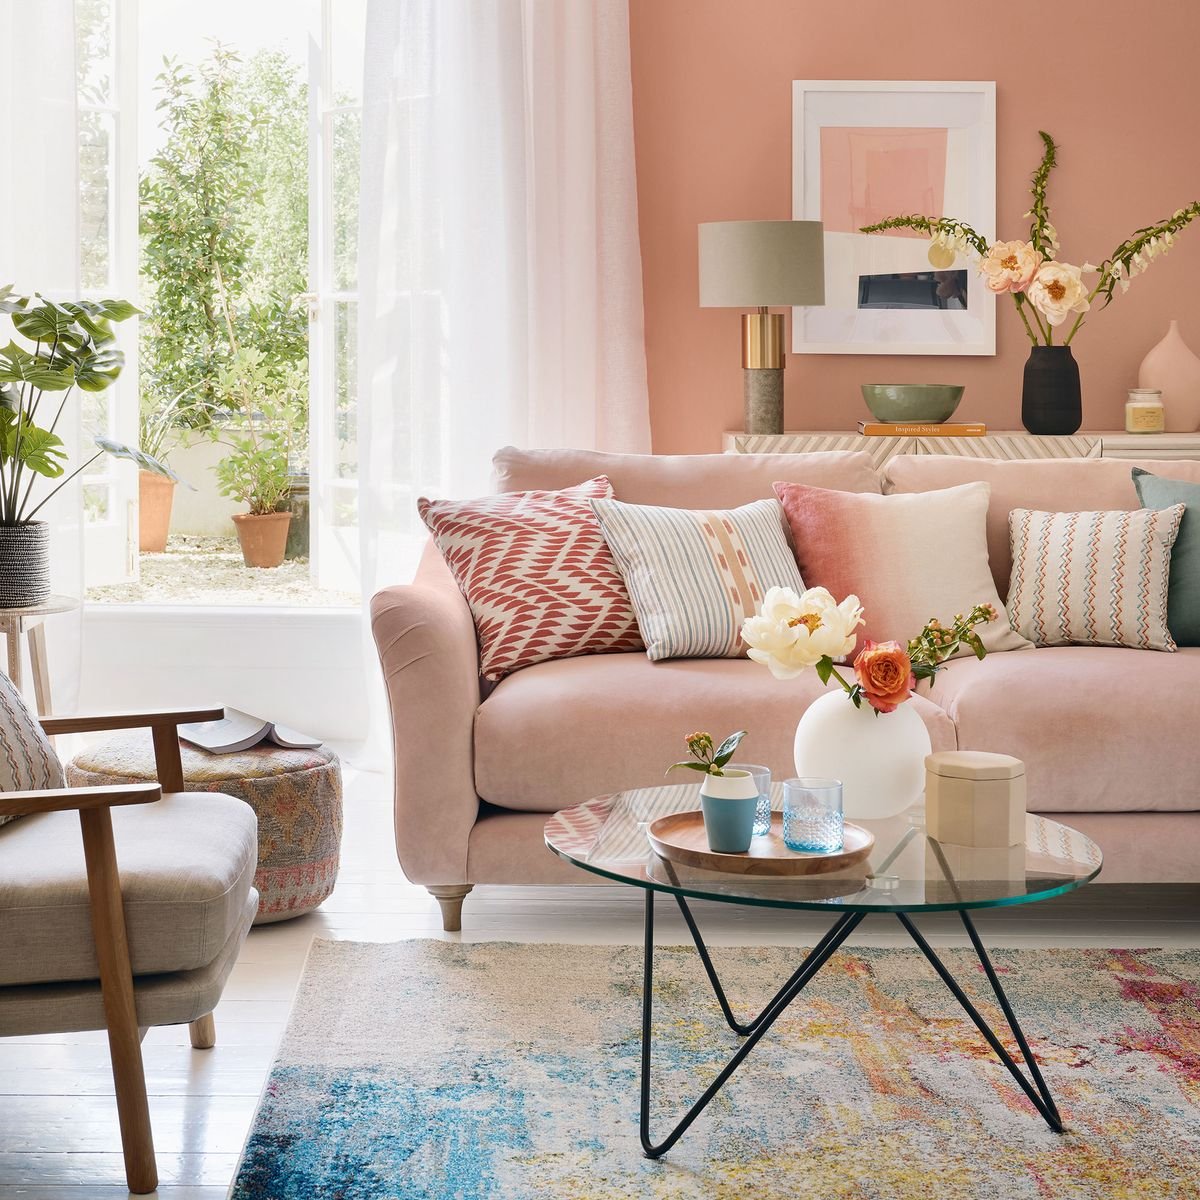 How to make a small living room look bigger – tricks to stretch your space